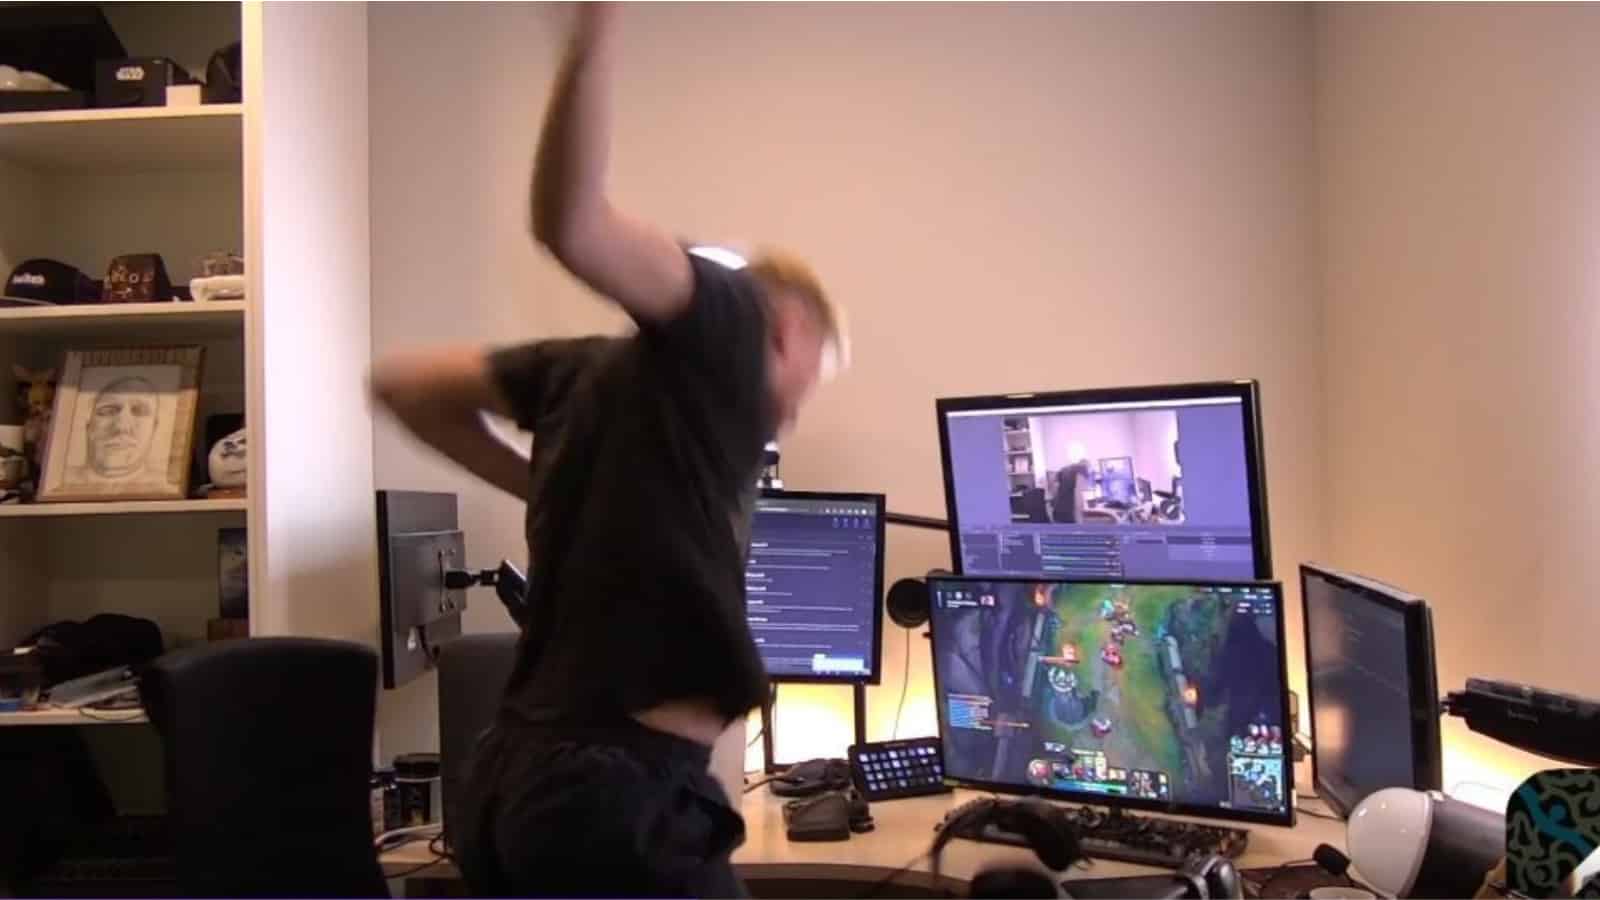 Twitch streamer loses it and smashes keyboard after viewer roasts him over LoL gameplay